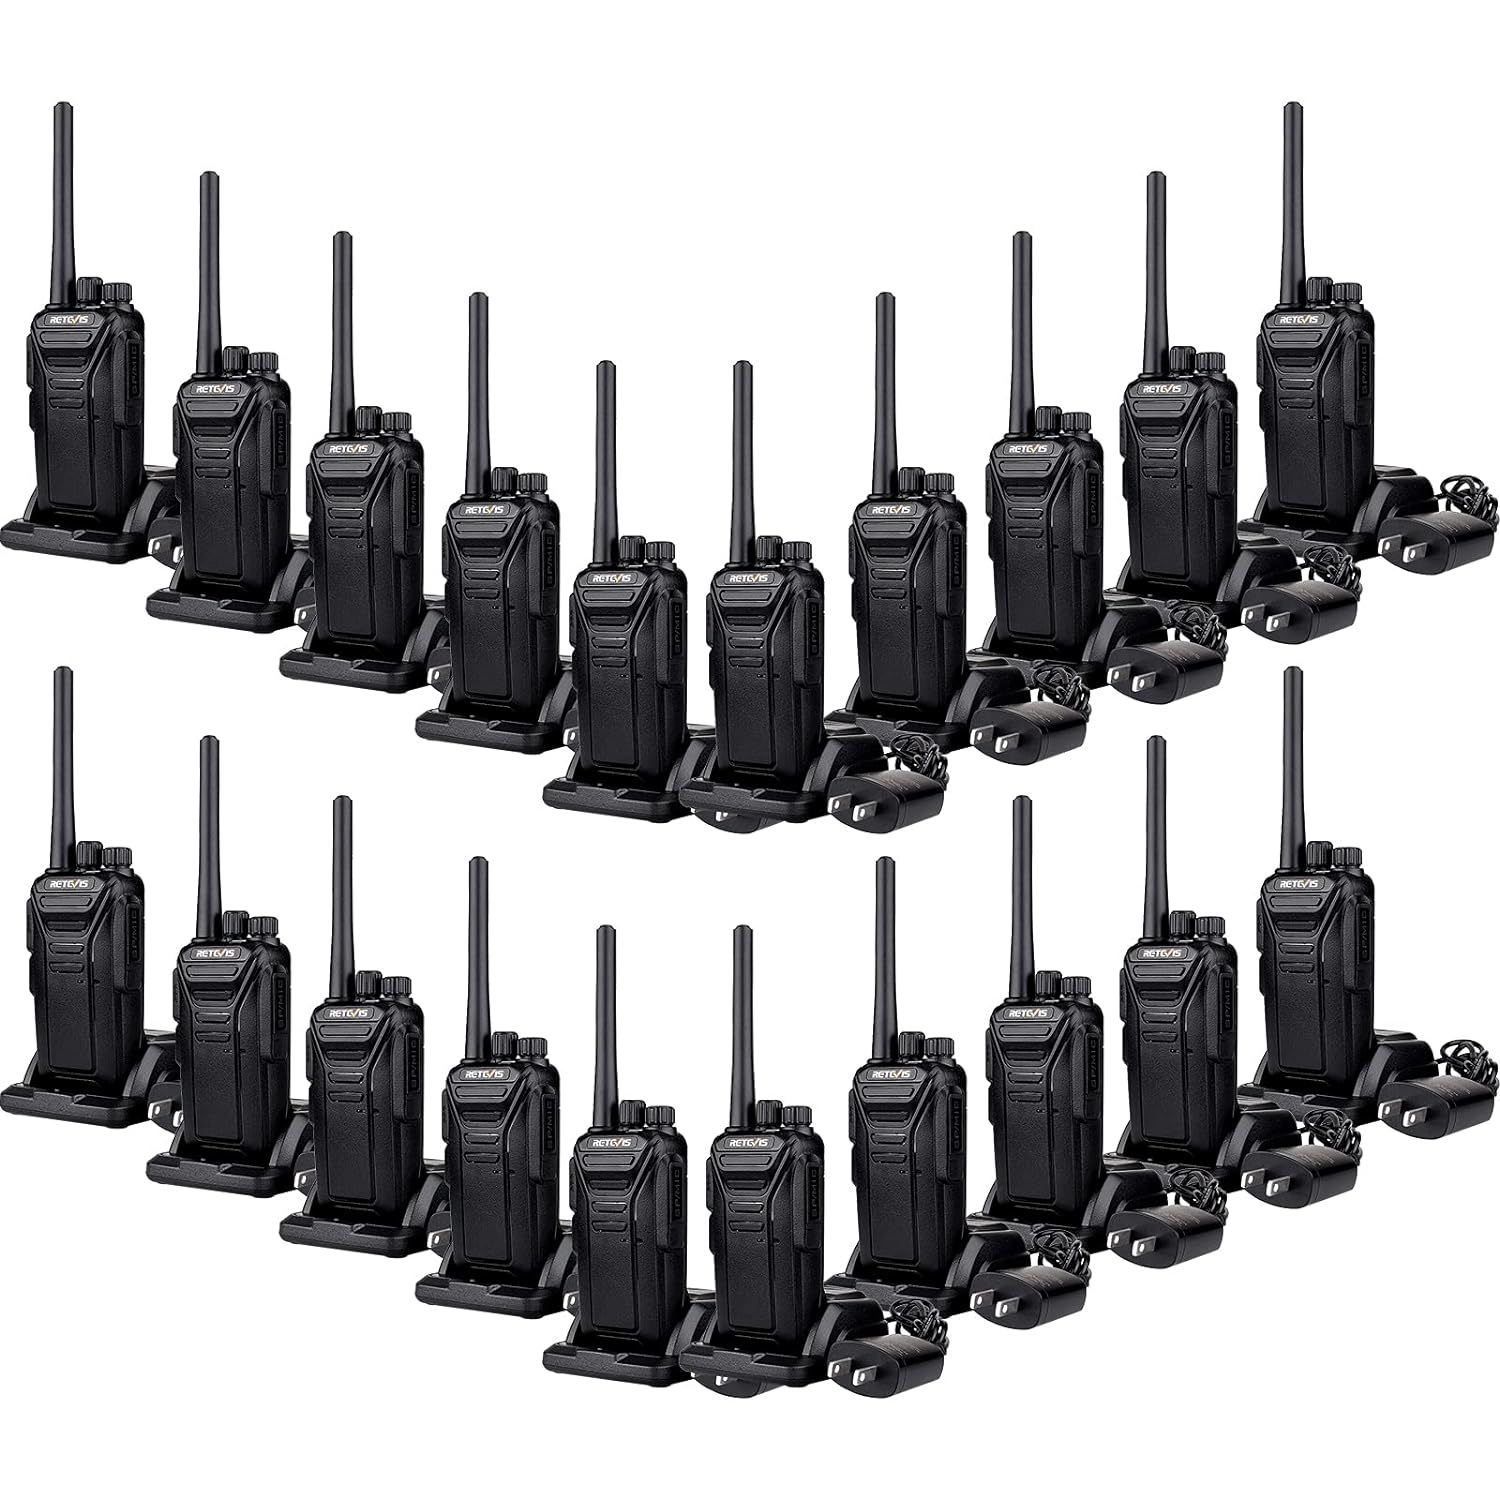 Retevis RT21 Updated 3000mAh Rechargeable Two Way Radio Portable Vox Adult Walkie Talkies with Earpiece and Mic Set(10 Pack) - 2